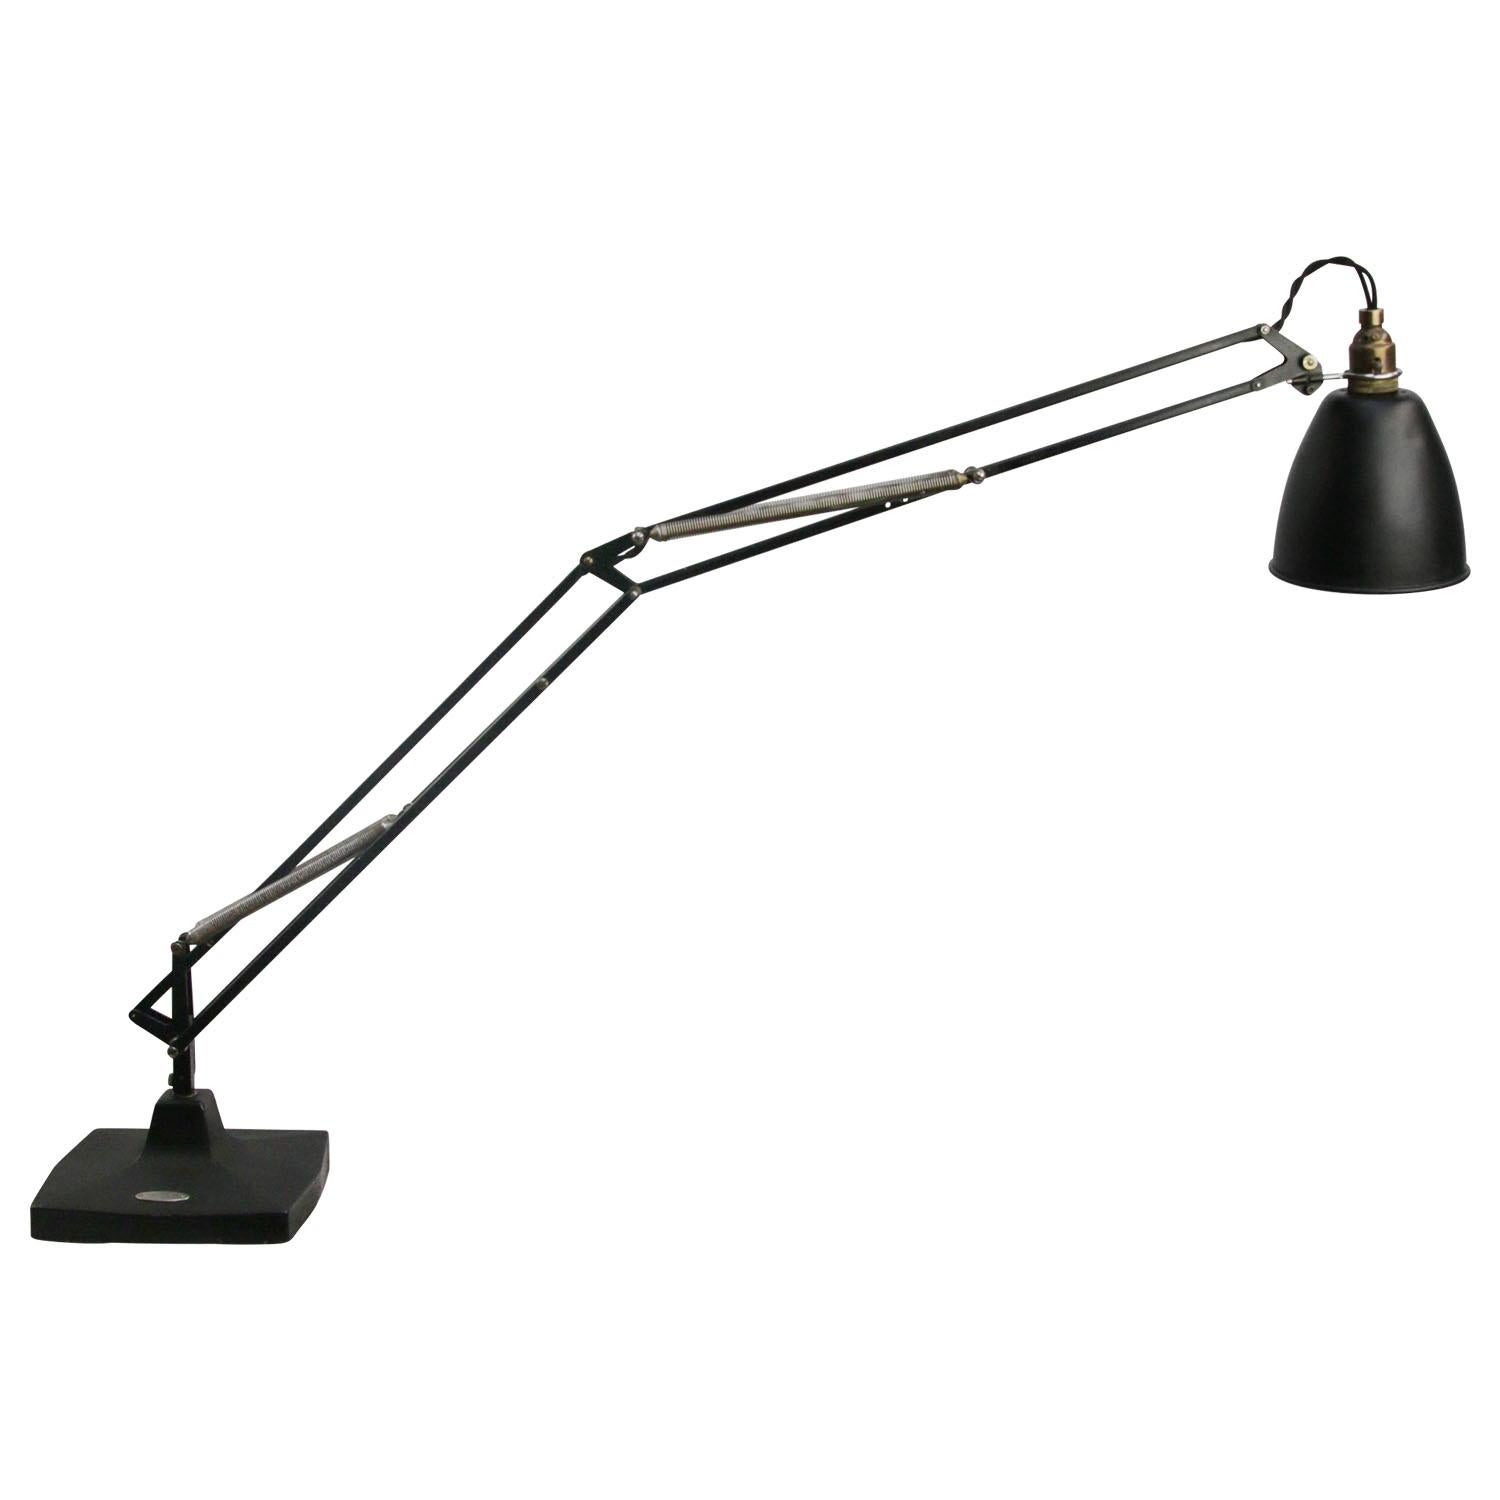 Industrial Aluminum and Iron Anglepoise 1208 Table Lamp from Herbert Terry & Sons